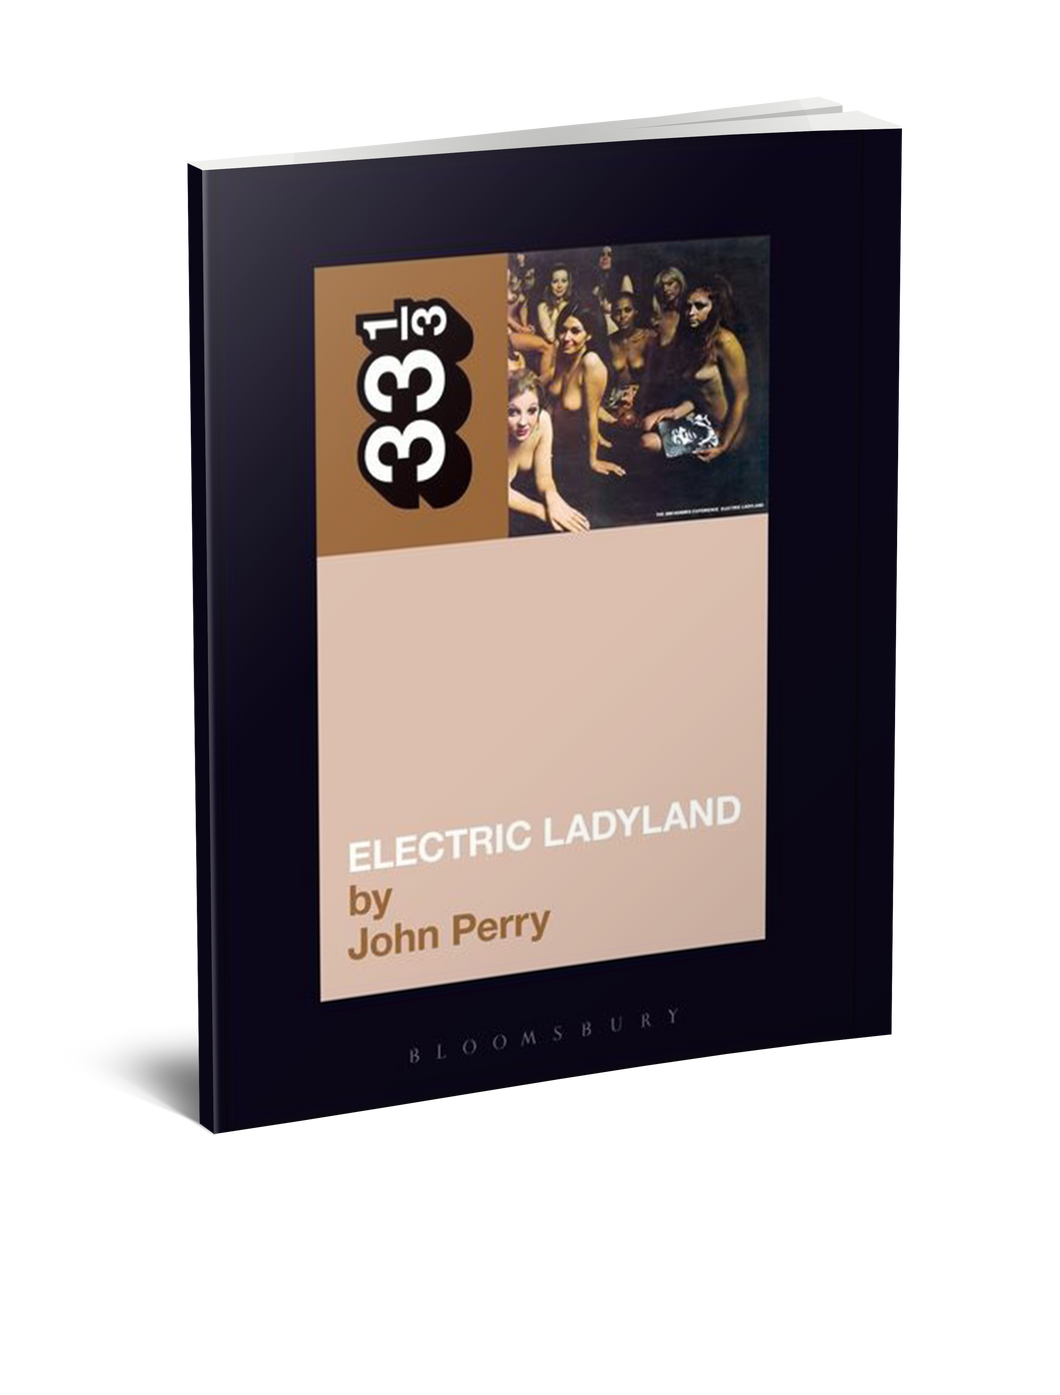 Jimi Hendrix's Electric Ladyland (33 1/3 Book Series) by John Perry